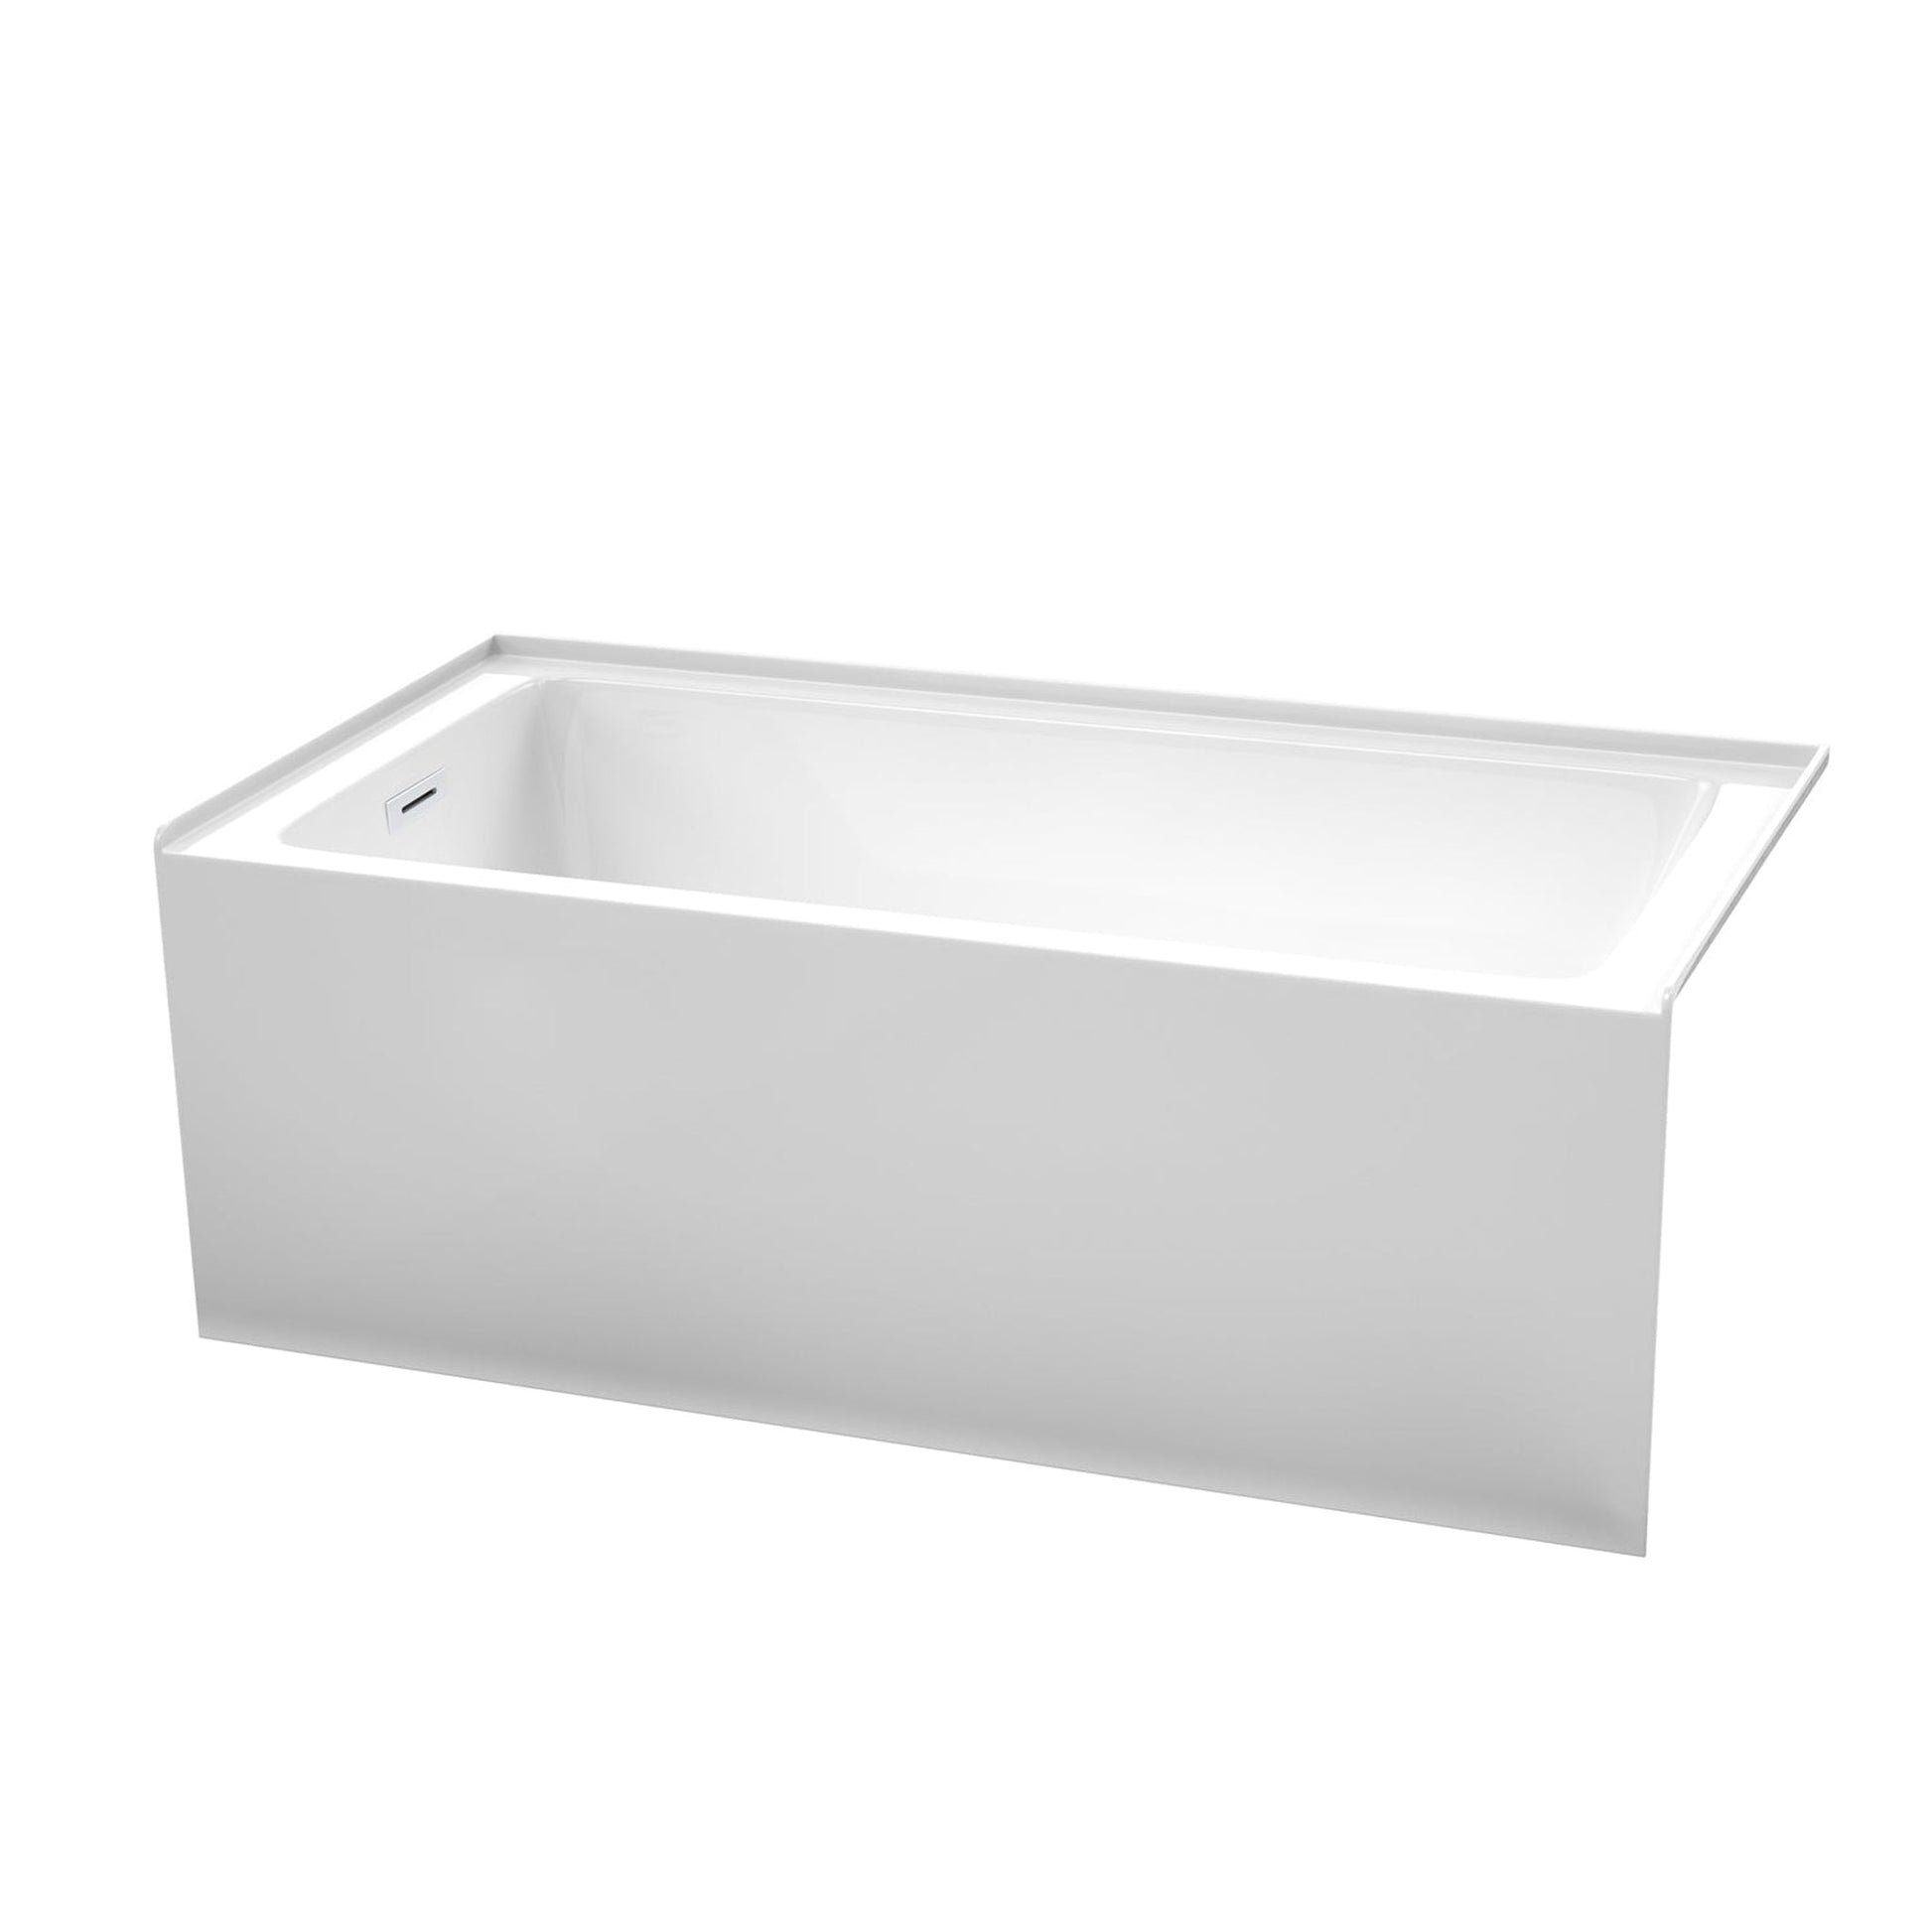 Wyndham Collection Grayley 60" x 30" Alcove Bathtub in White With Left-Hand Drain and Overflow Trim in Shiny White